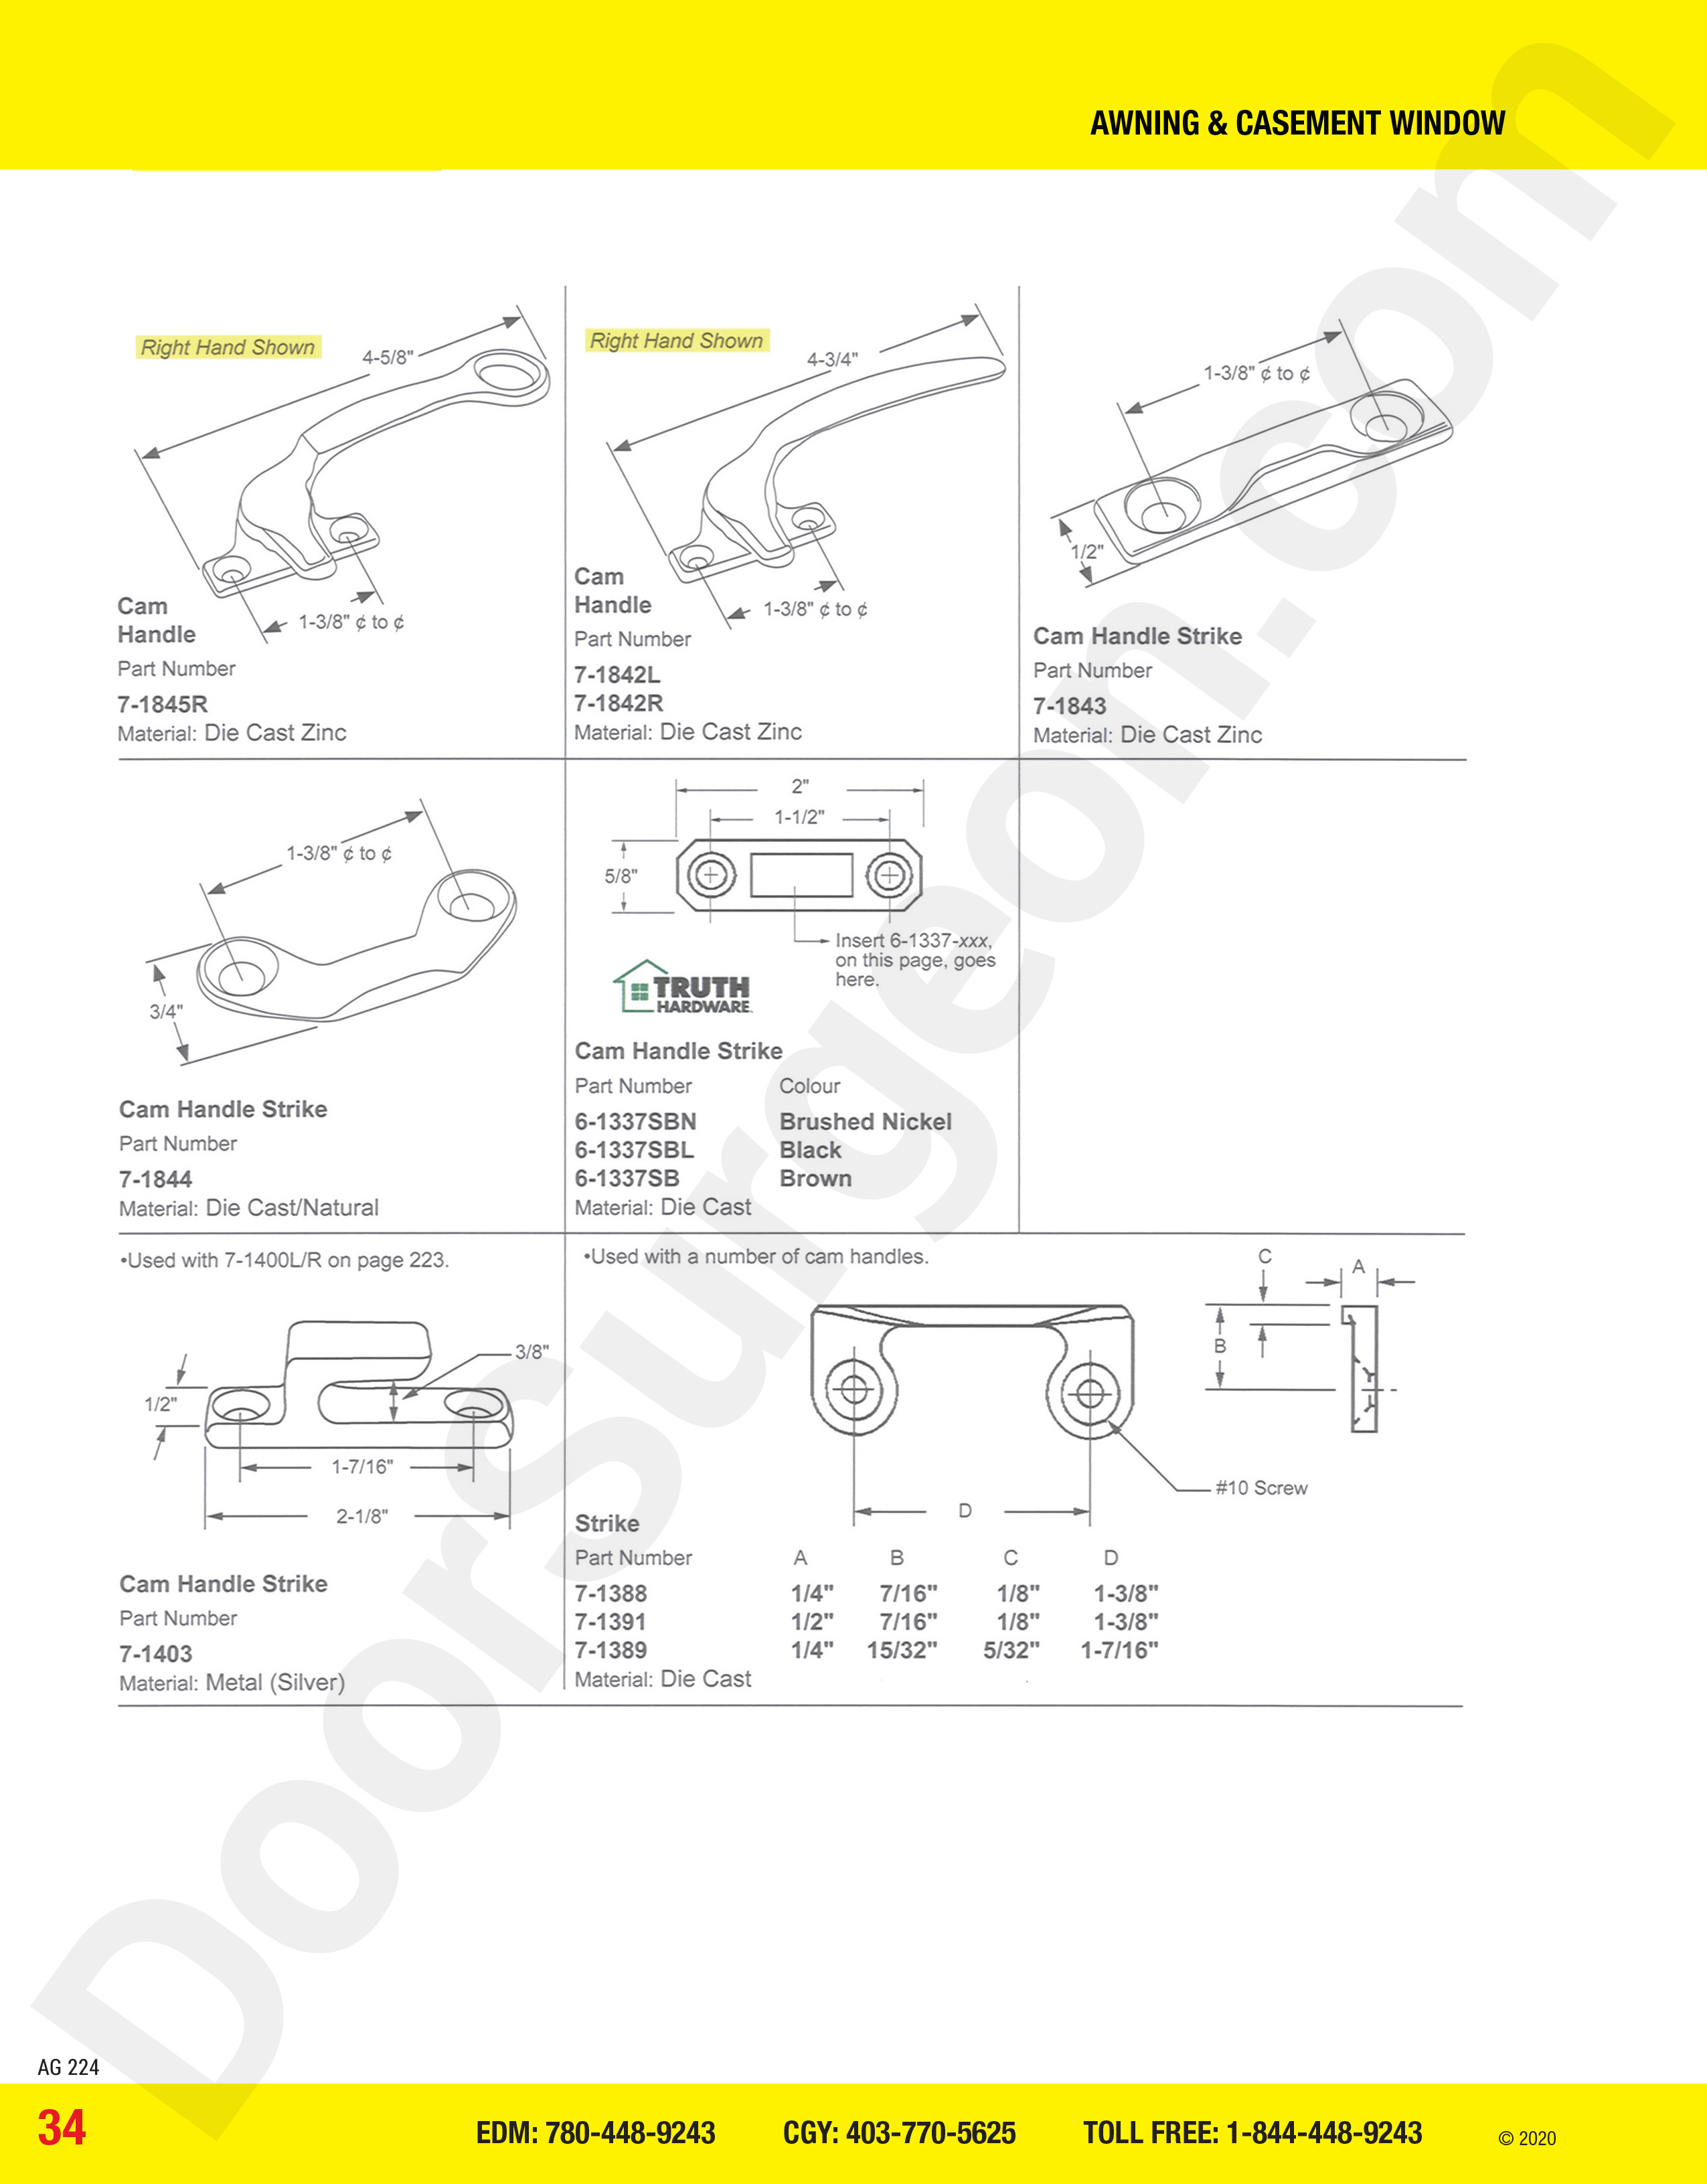 awning and casement window parts for cam handle strikes